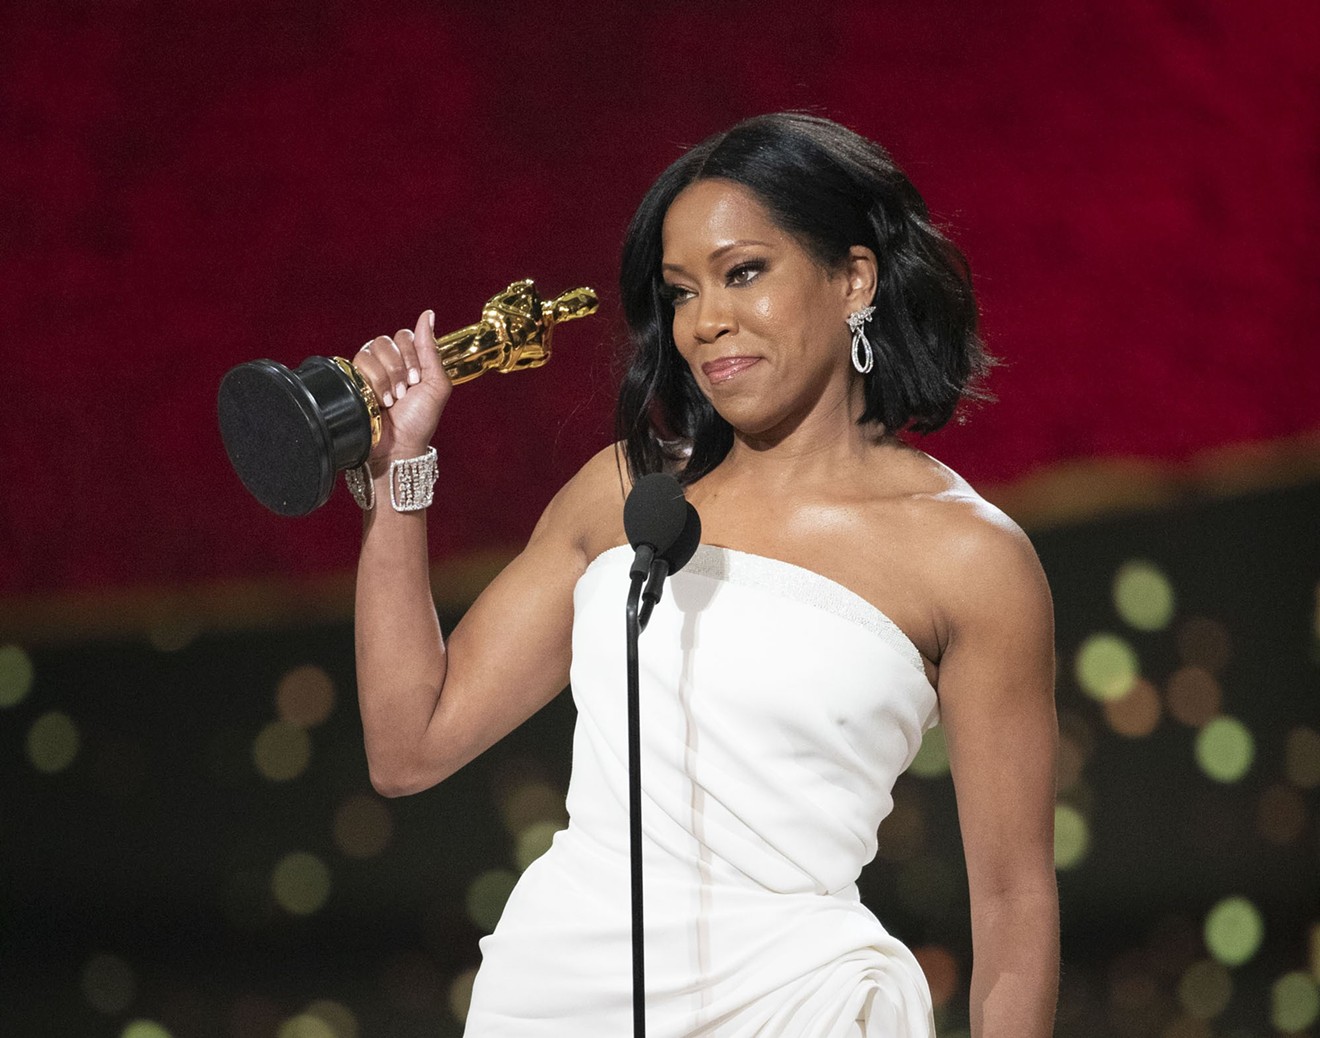 Regina King accepts her Oscar for best supporting actress.